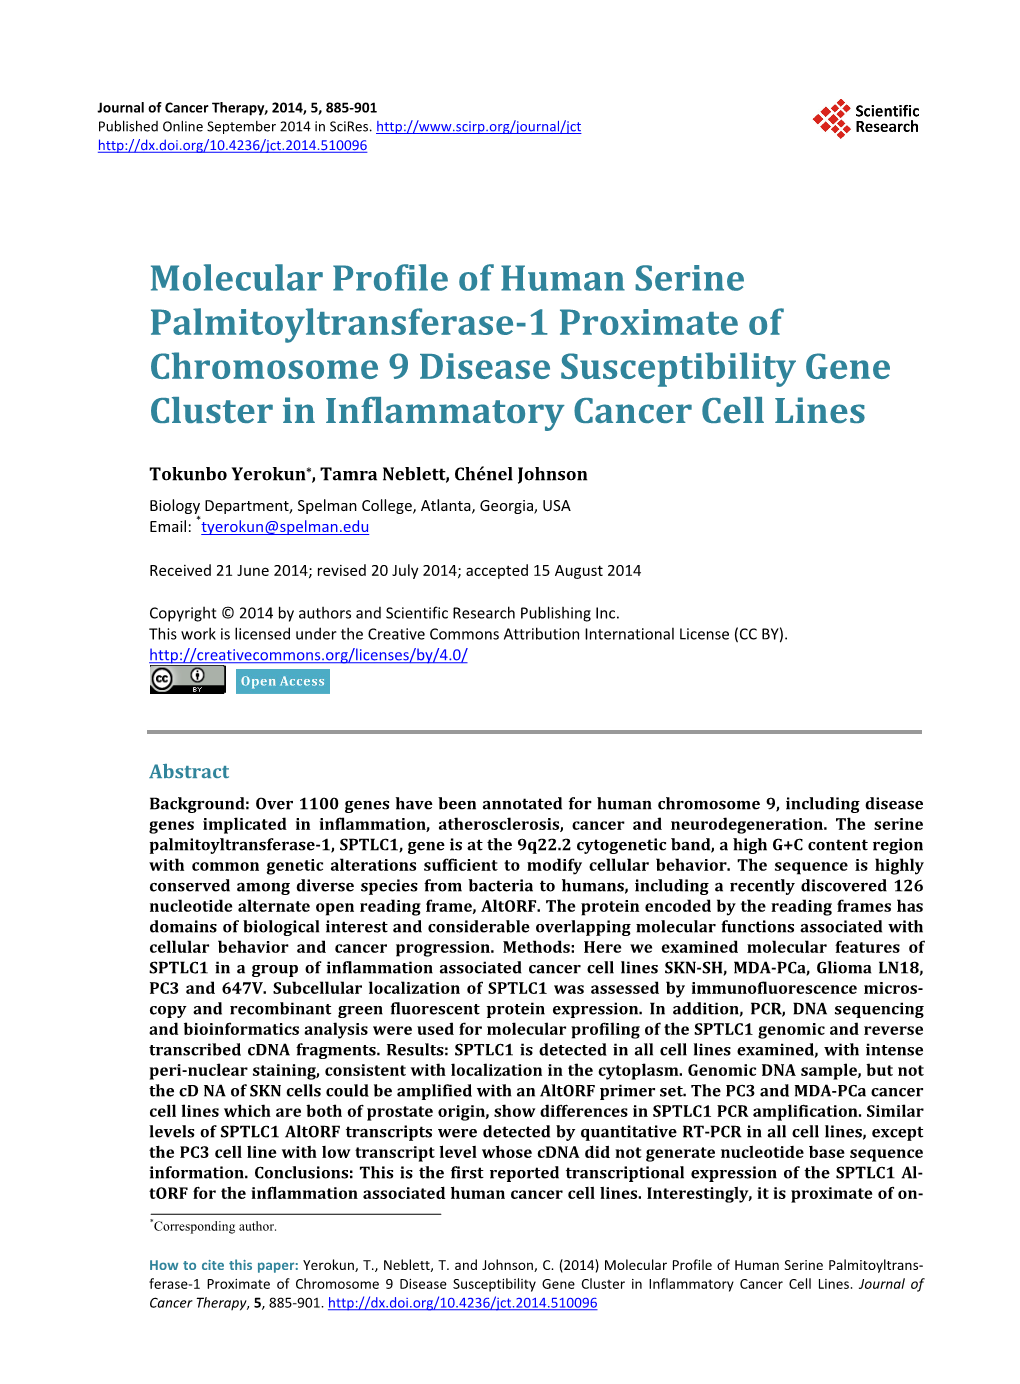 Molecular Profile of Human Serine Palmitoyltransferase-1 Proximate of Chromosome 9 Disease Susceptibility Gene Cluster in Inflammatory Cancer Cell Lines